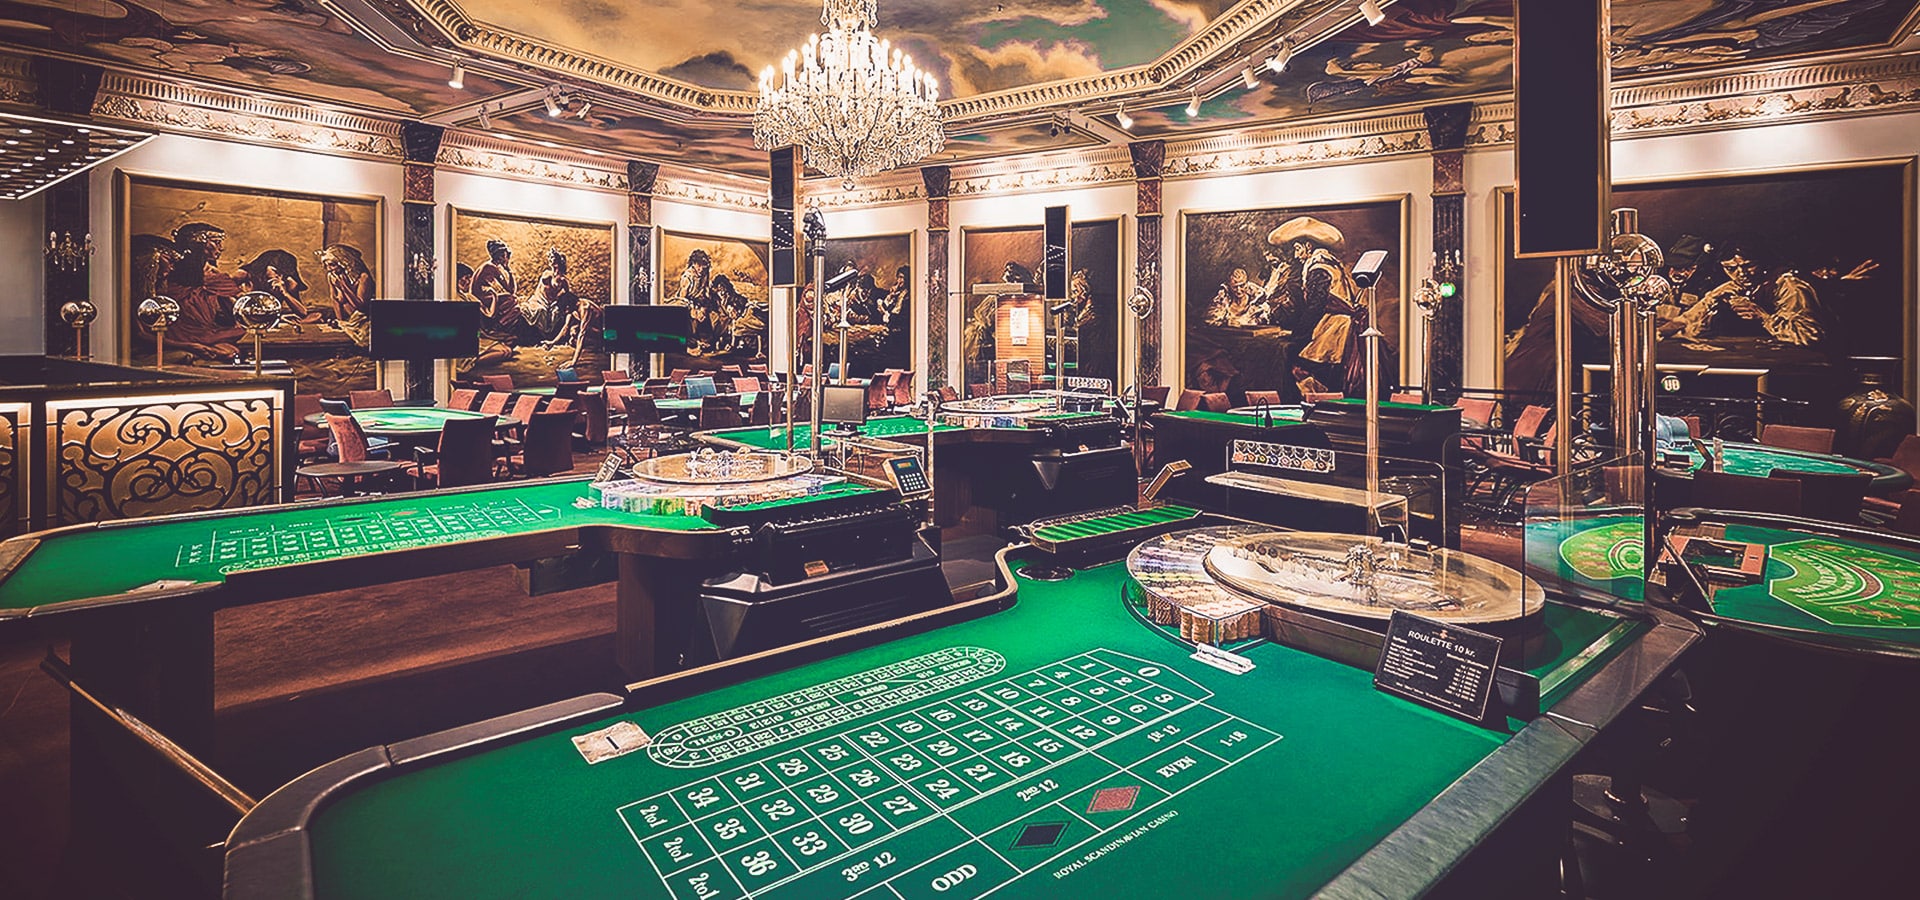 The Best Casinos Online in the Real World